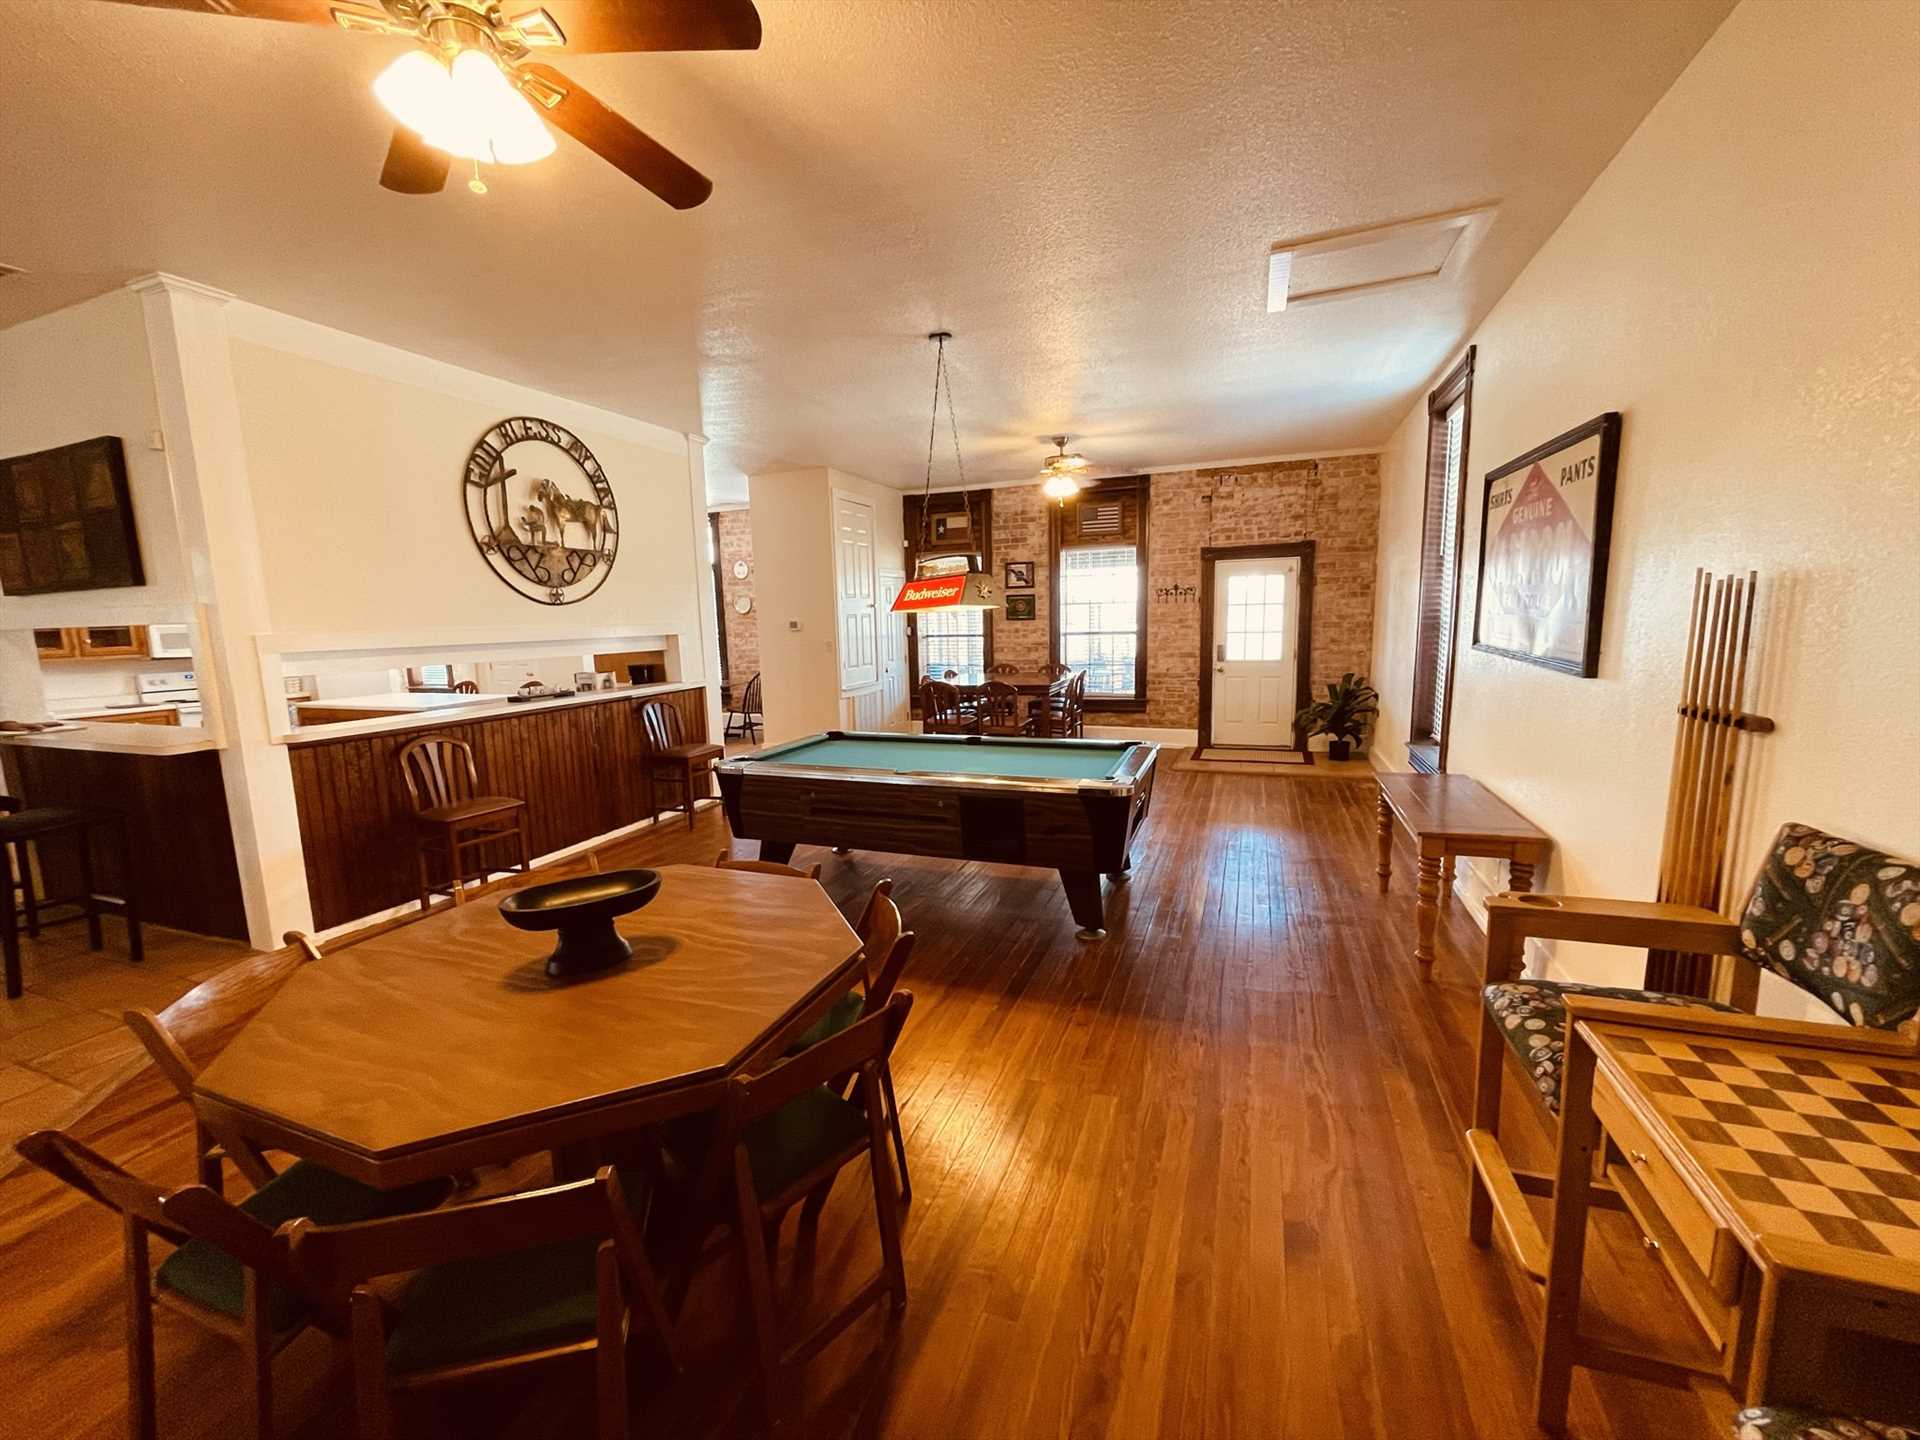                                                 Here's a great room for games of all kinds! From the pool table to more than one gaming table, there's tons of fun just waiting for you.